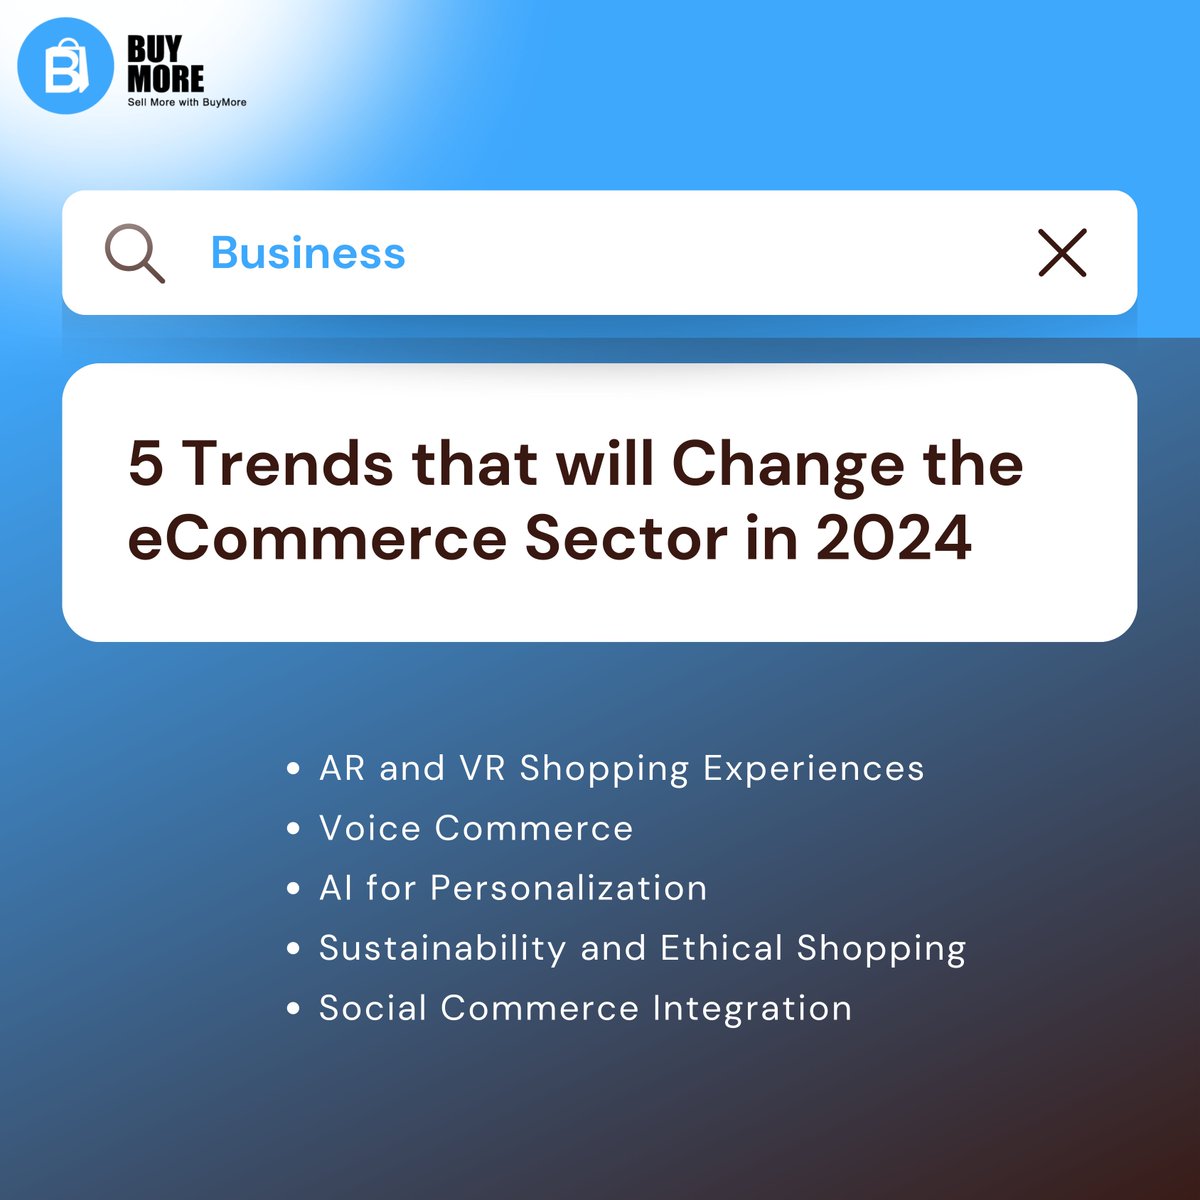 5 Trends that will Change the eCommerce Sector in 2024! 🚀

#EcommerceTrends #DigitalRetail #OnlineShopping #Retail #RetailInnovation #ConsumerTrends #AI #ShoppingExperience #OnlineRetail #DigitalCommerce #EcommerceStrategy #MarketTrends #EcommerceBusiness #OnlineSales #BuyMore